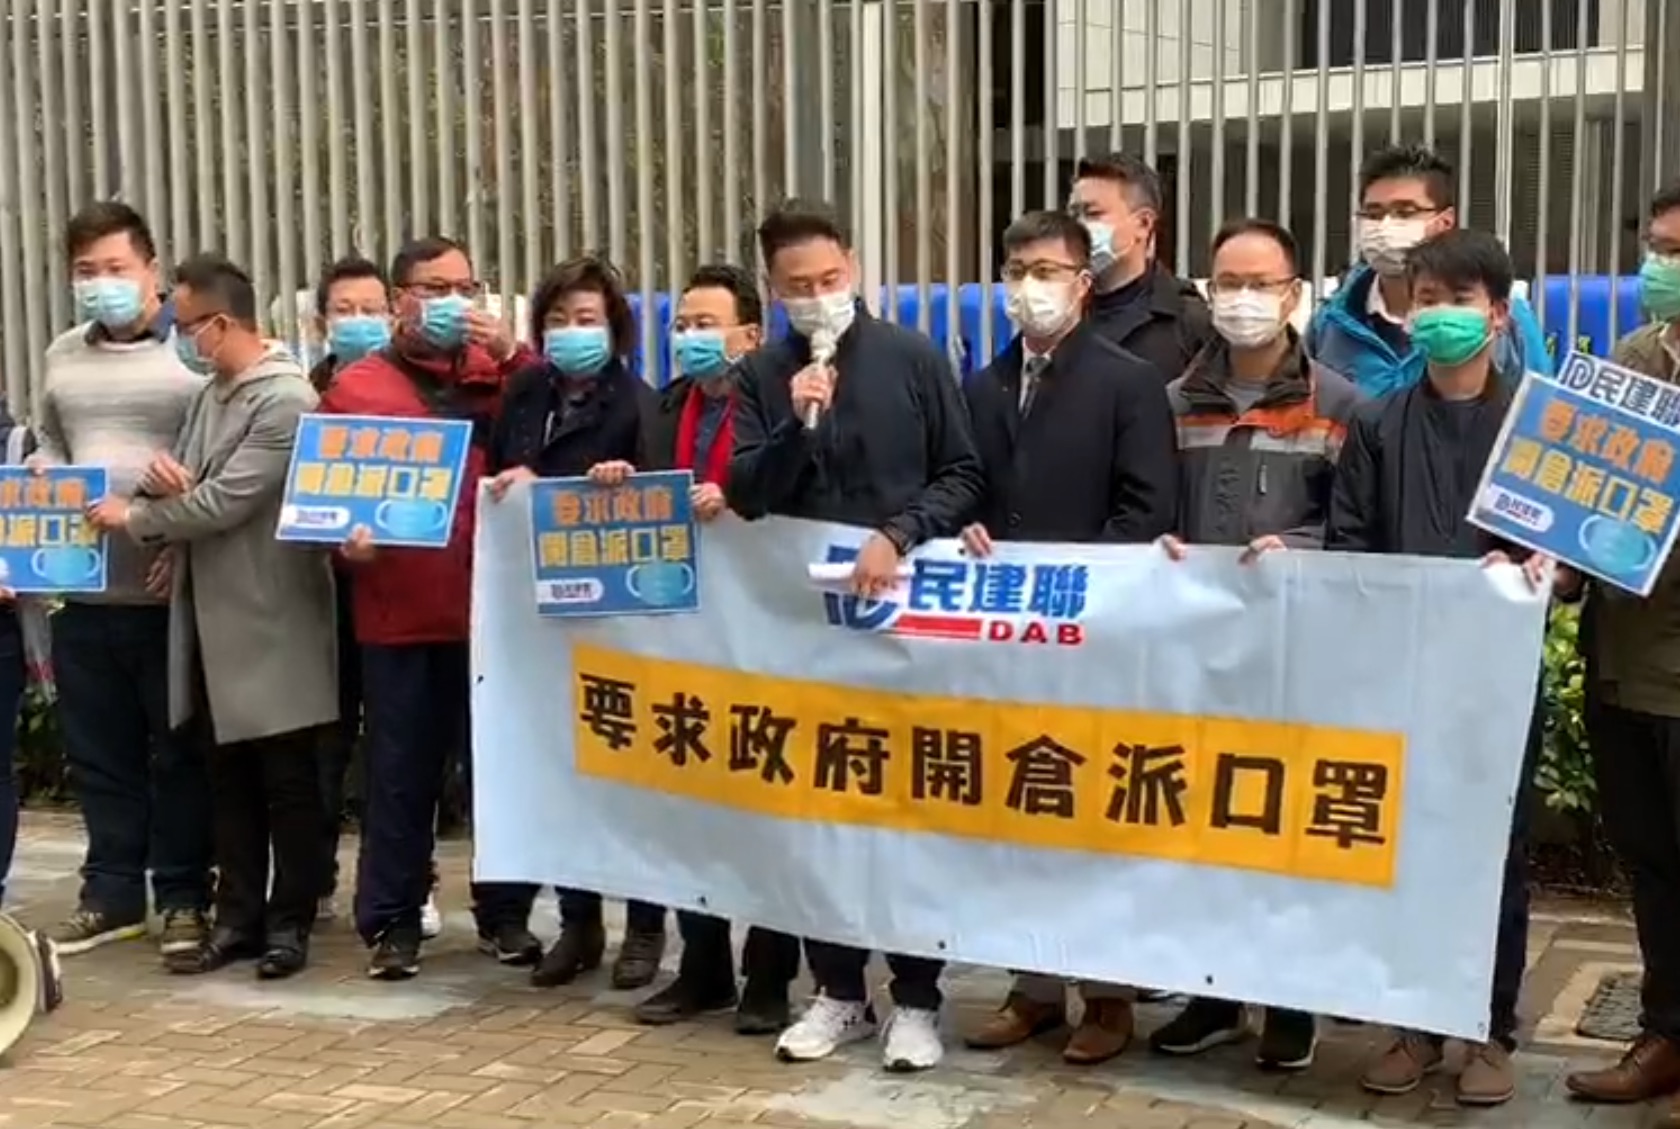 Members of the pro-Beijing DAB call on the government to release more masks, while slamming CE Carrie Lam over a government effort to reduce mask use among civil servants to conserve them for those most in need. Photo via Facebook.